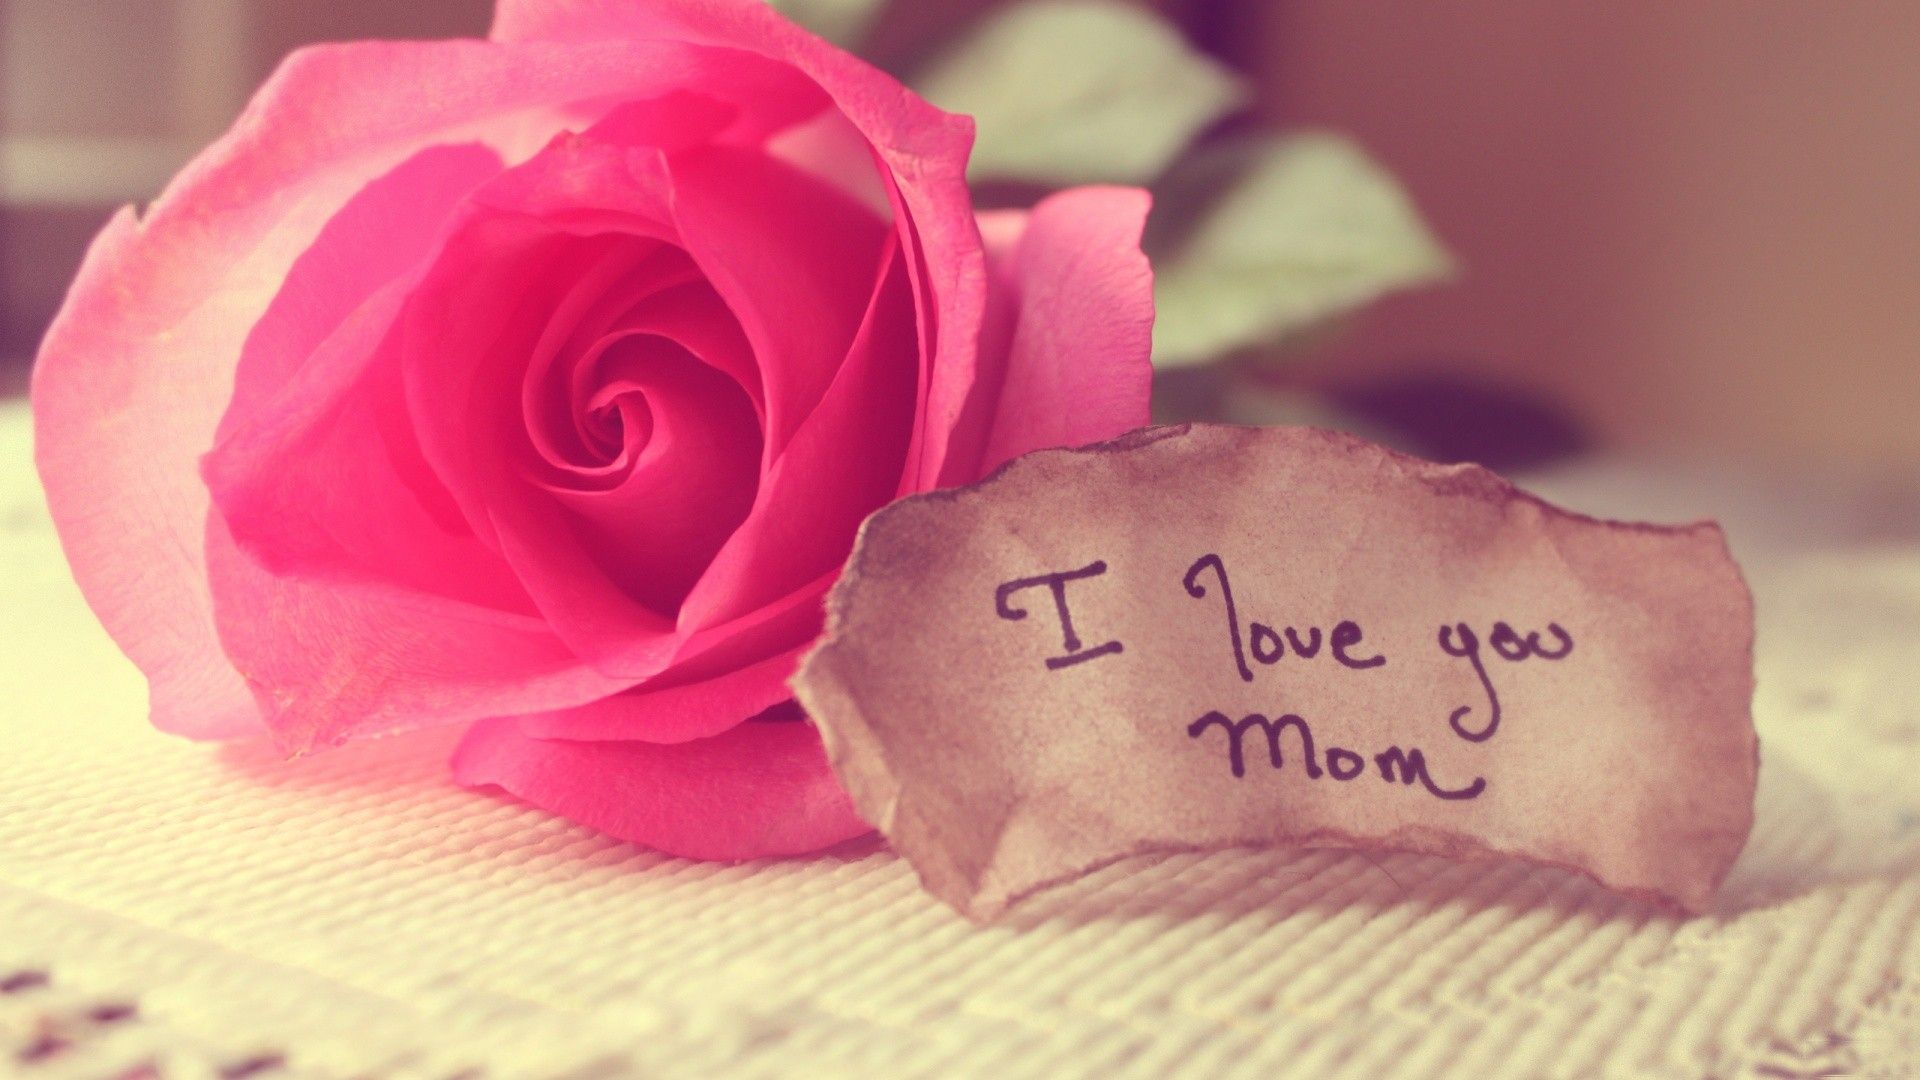 I Love You Mom Wallpaper HD With Image Happy